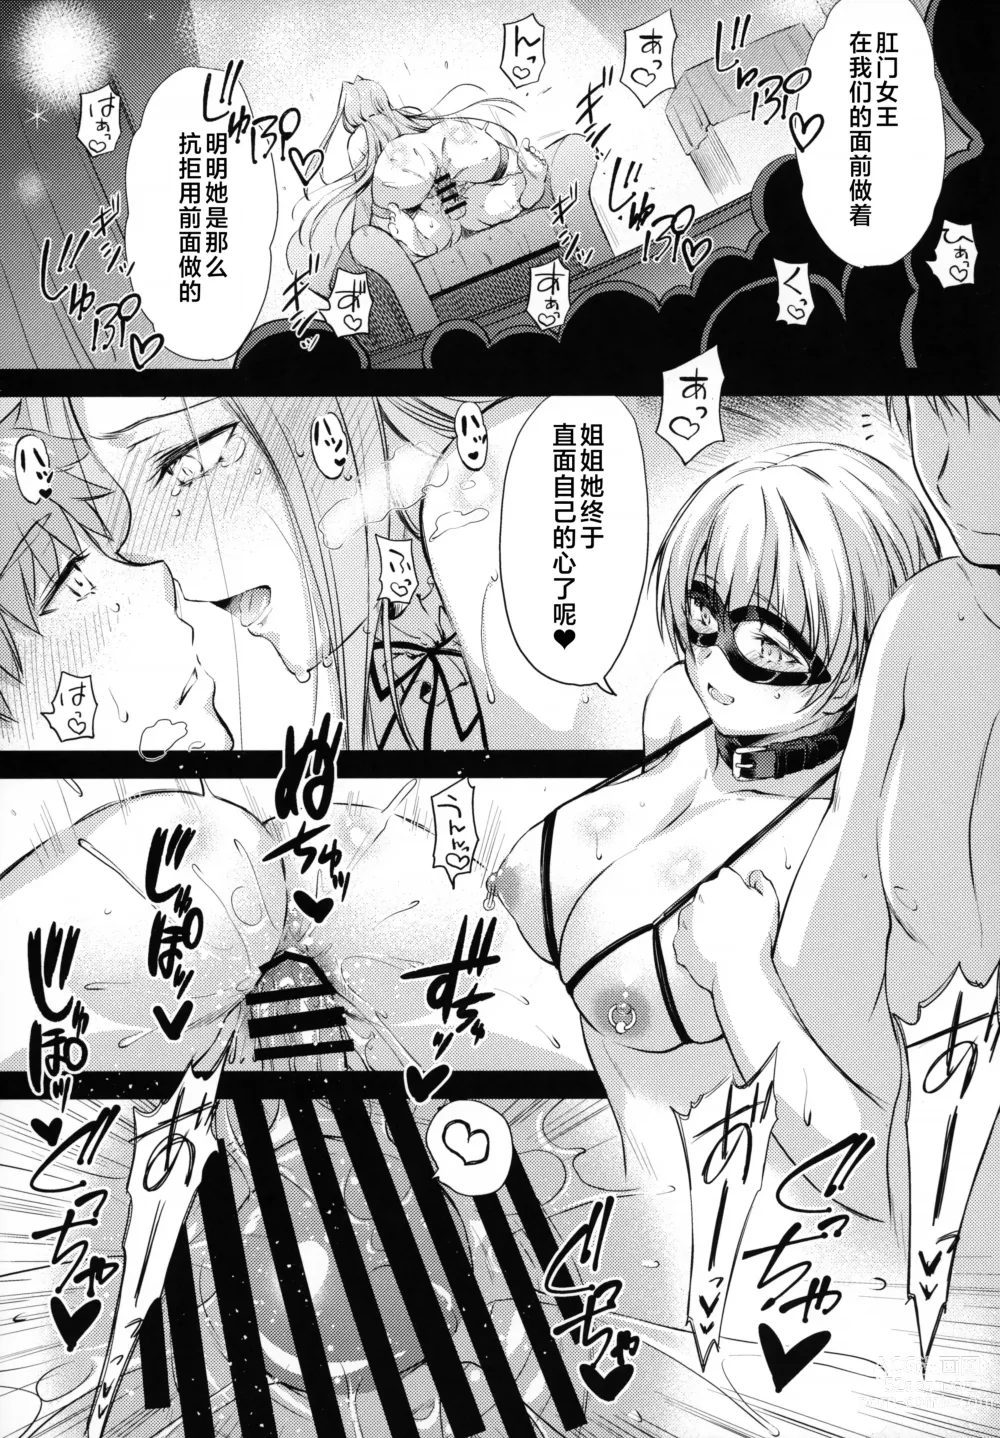 Page 18 of doujinshi R.O.D 18 -Rider or Die-